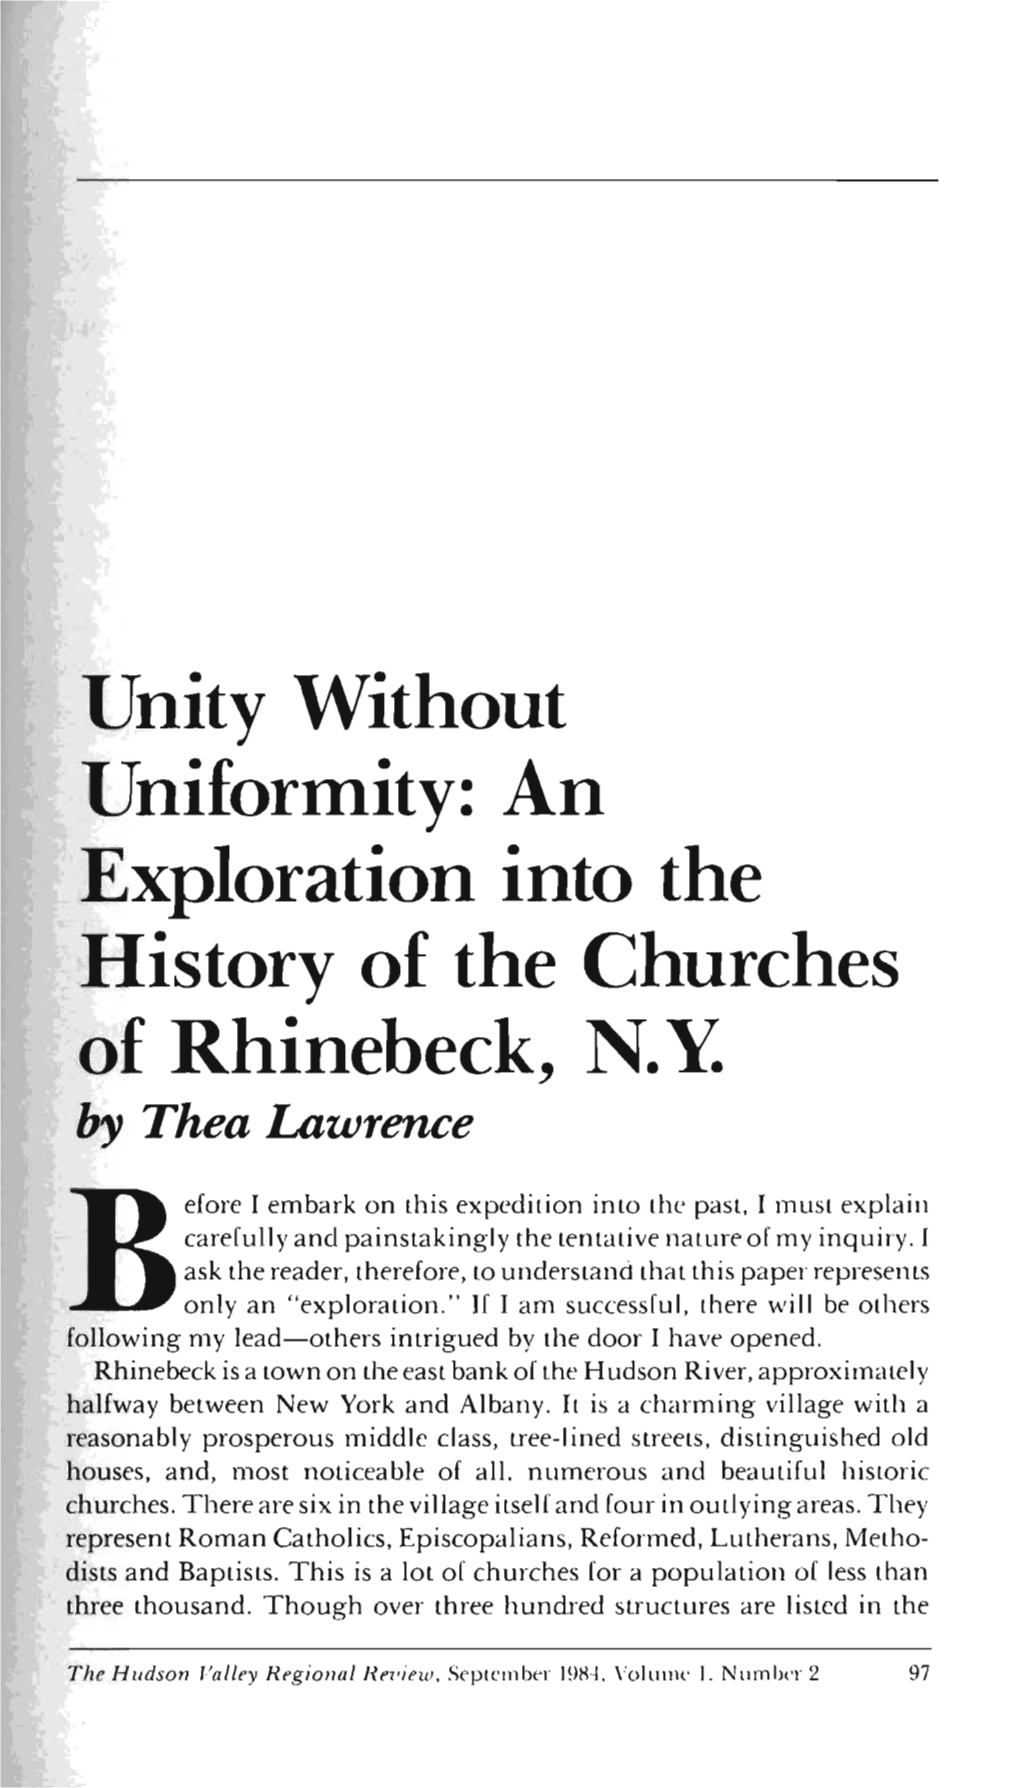 An Exploration Into the History of the Churches of Rhinebeck, NY